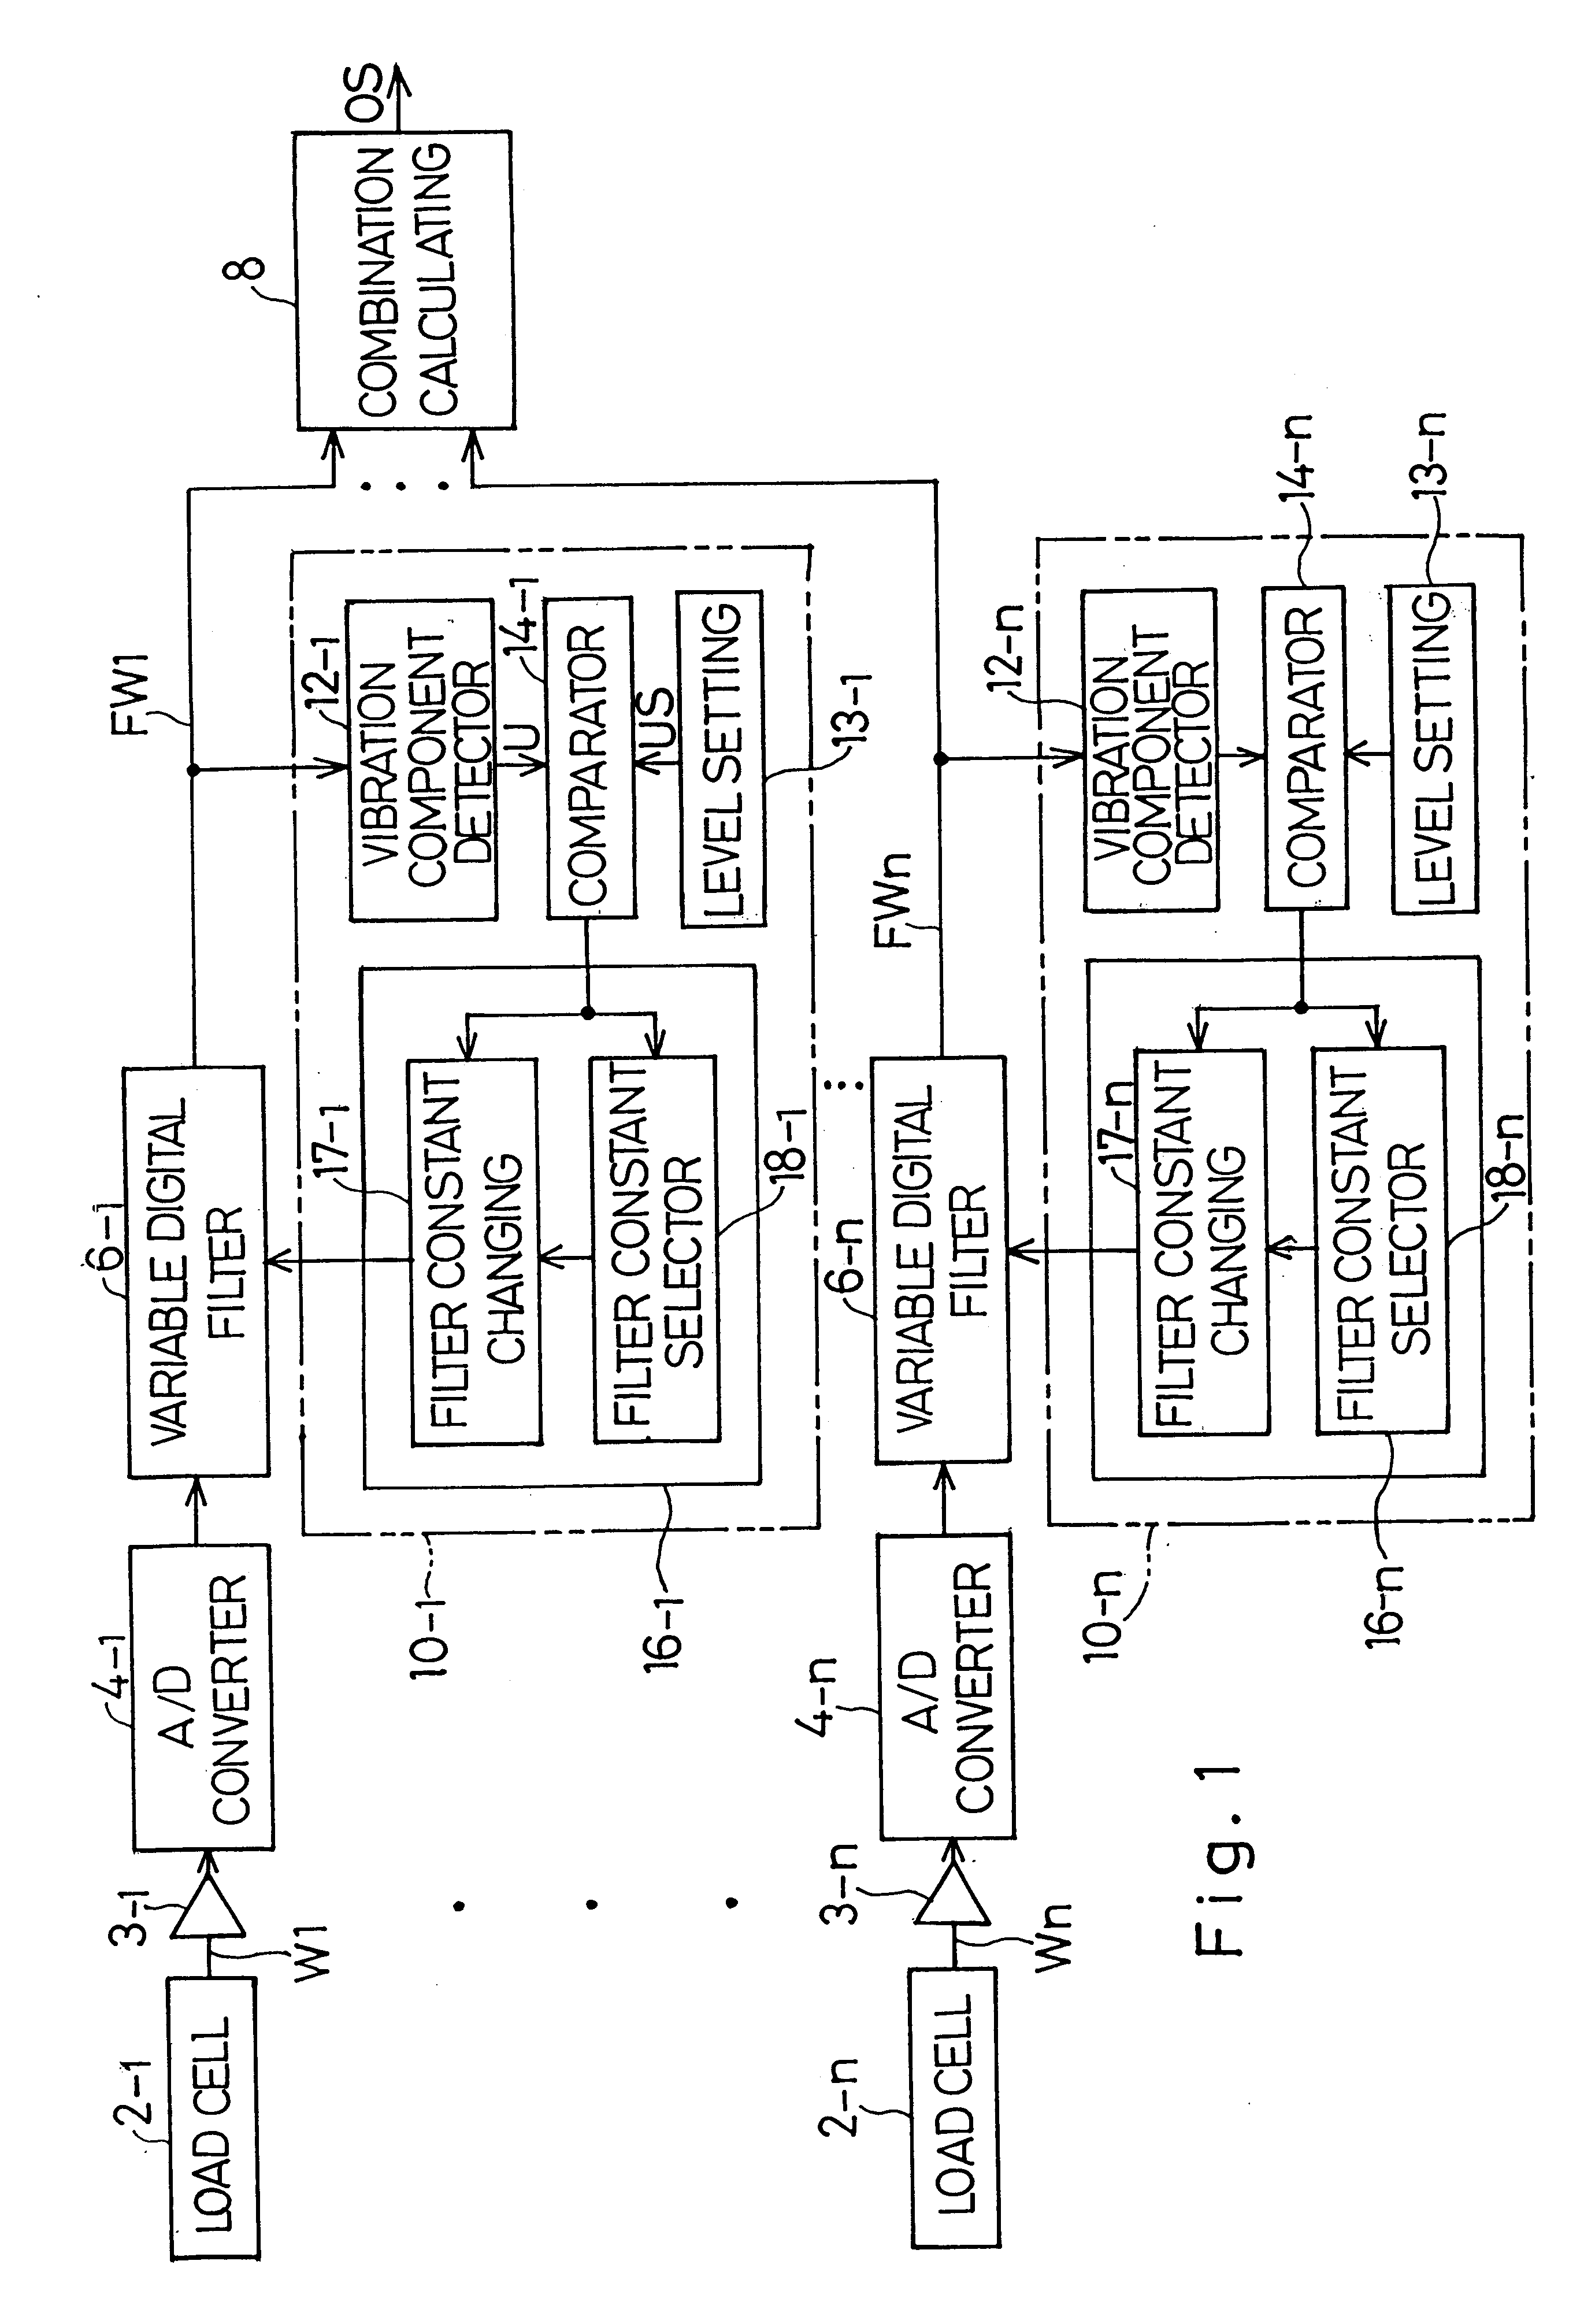 Weighing apparatus having an automatic filter adjusting capability